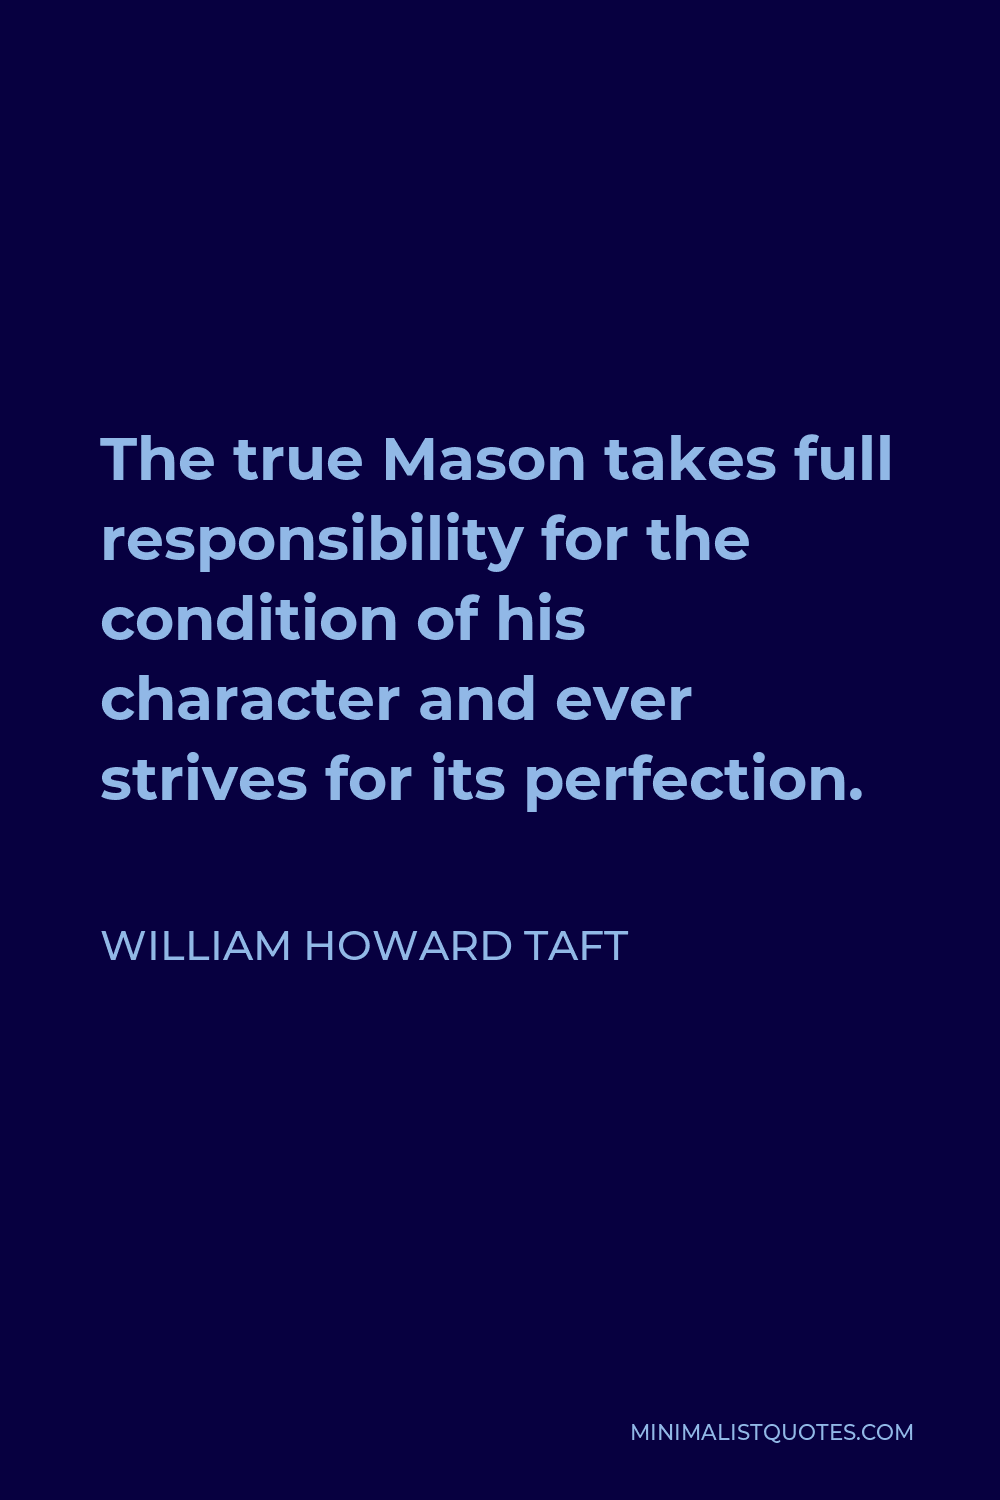 William Howard Taft Quote - The true Mason takes full responsibility for the condition of his character and ever strives for its perfection.